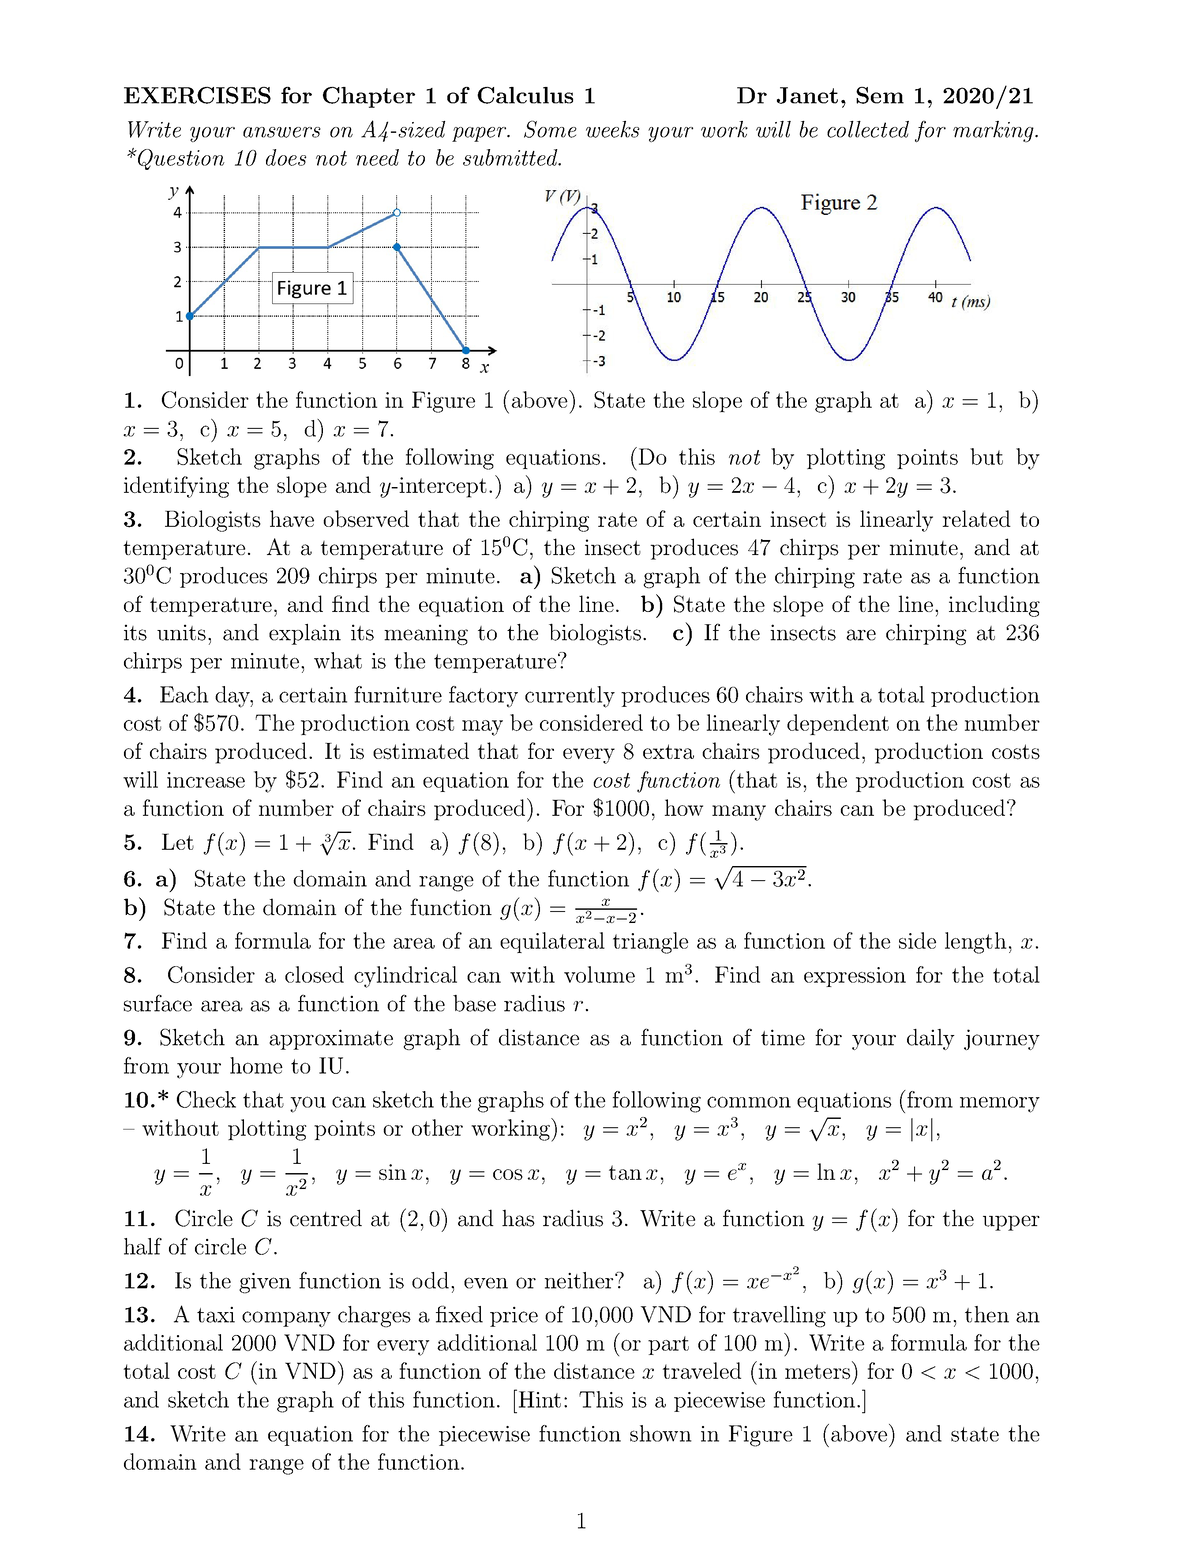 calculus-1-ex1-sem1-2020-2021-exercises-for-chapter-1-of-calculus-1